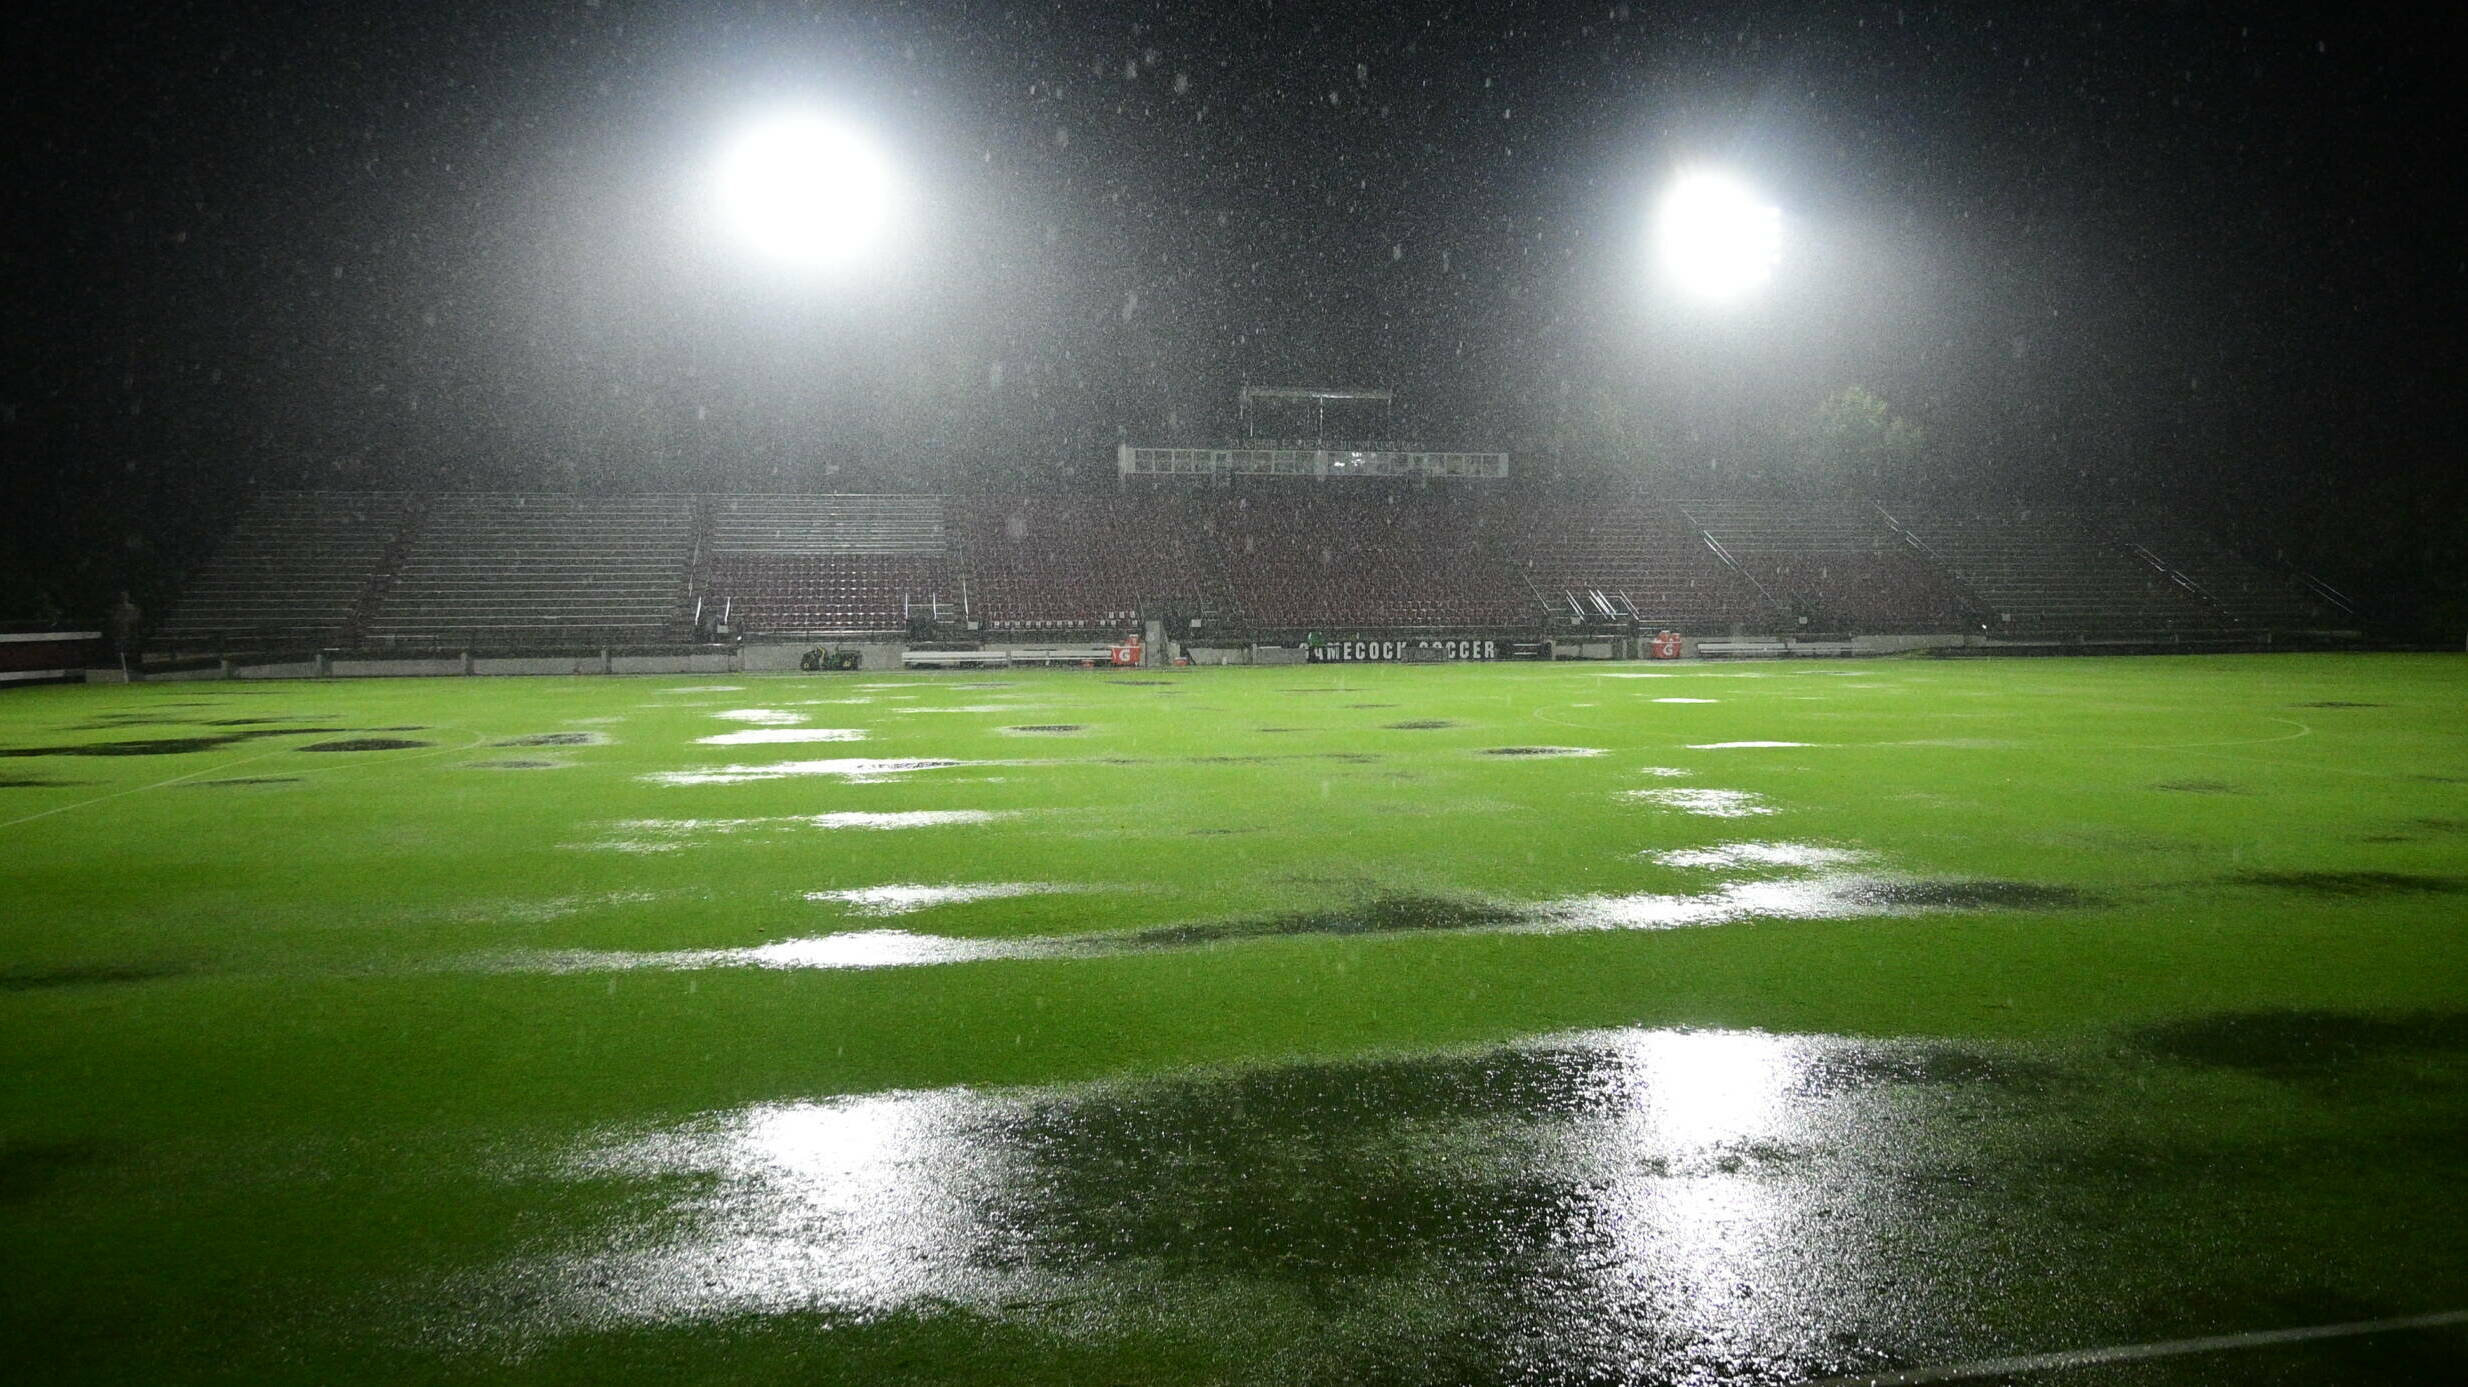 Men’s Soccer vs Winthrop Cancelled Due to Weather